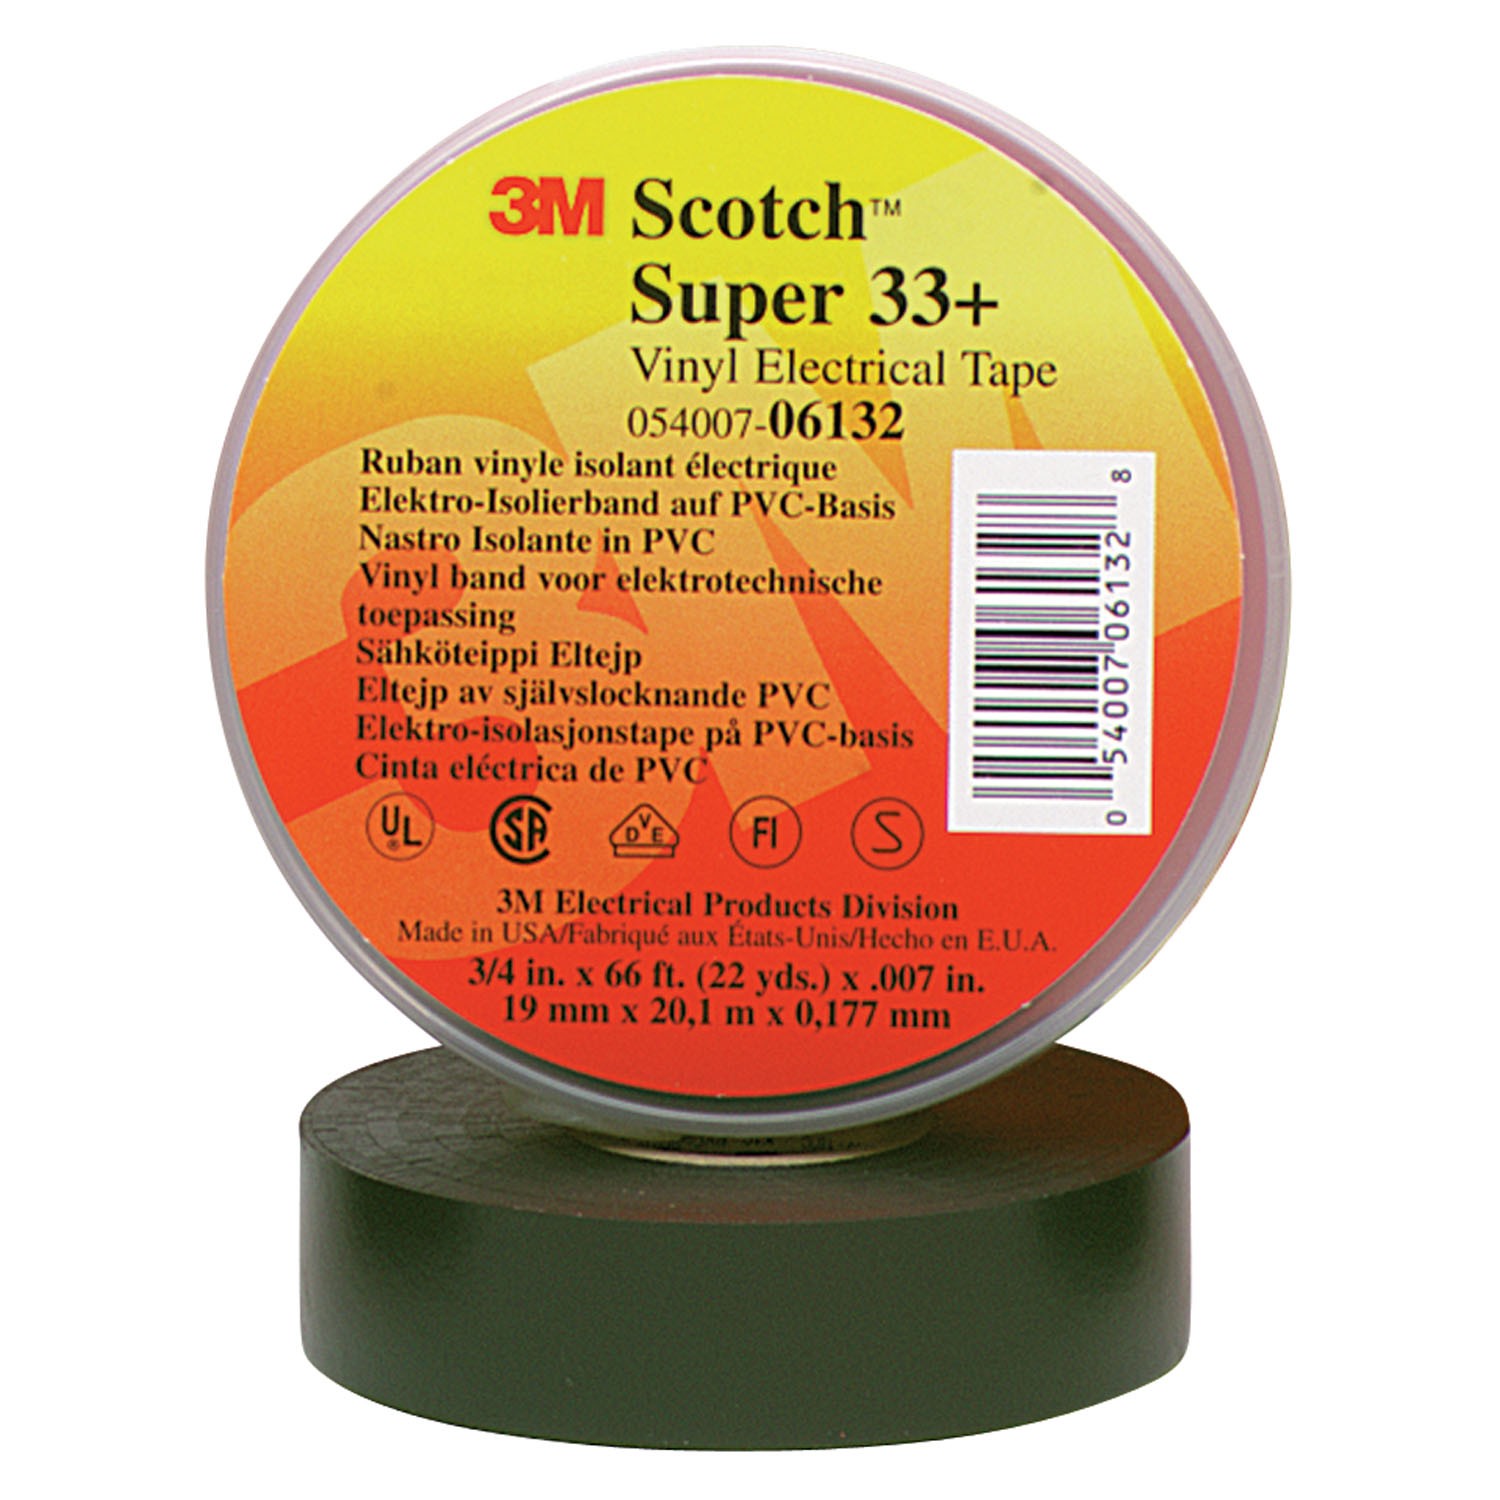 1" 3M Scotch Super 33+ Vinyl Electrical Tape with Non-Thermosetting Rubber Adhesive, black, 1" wide x  36 YD roll